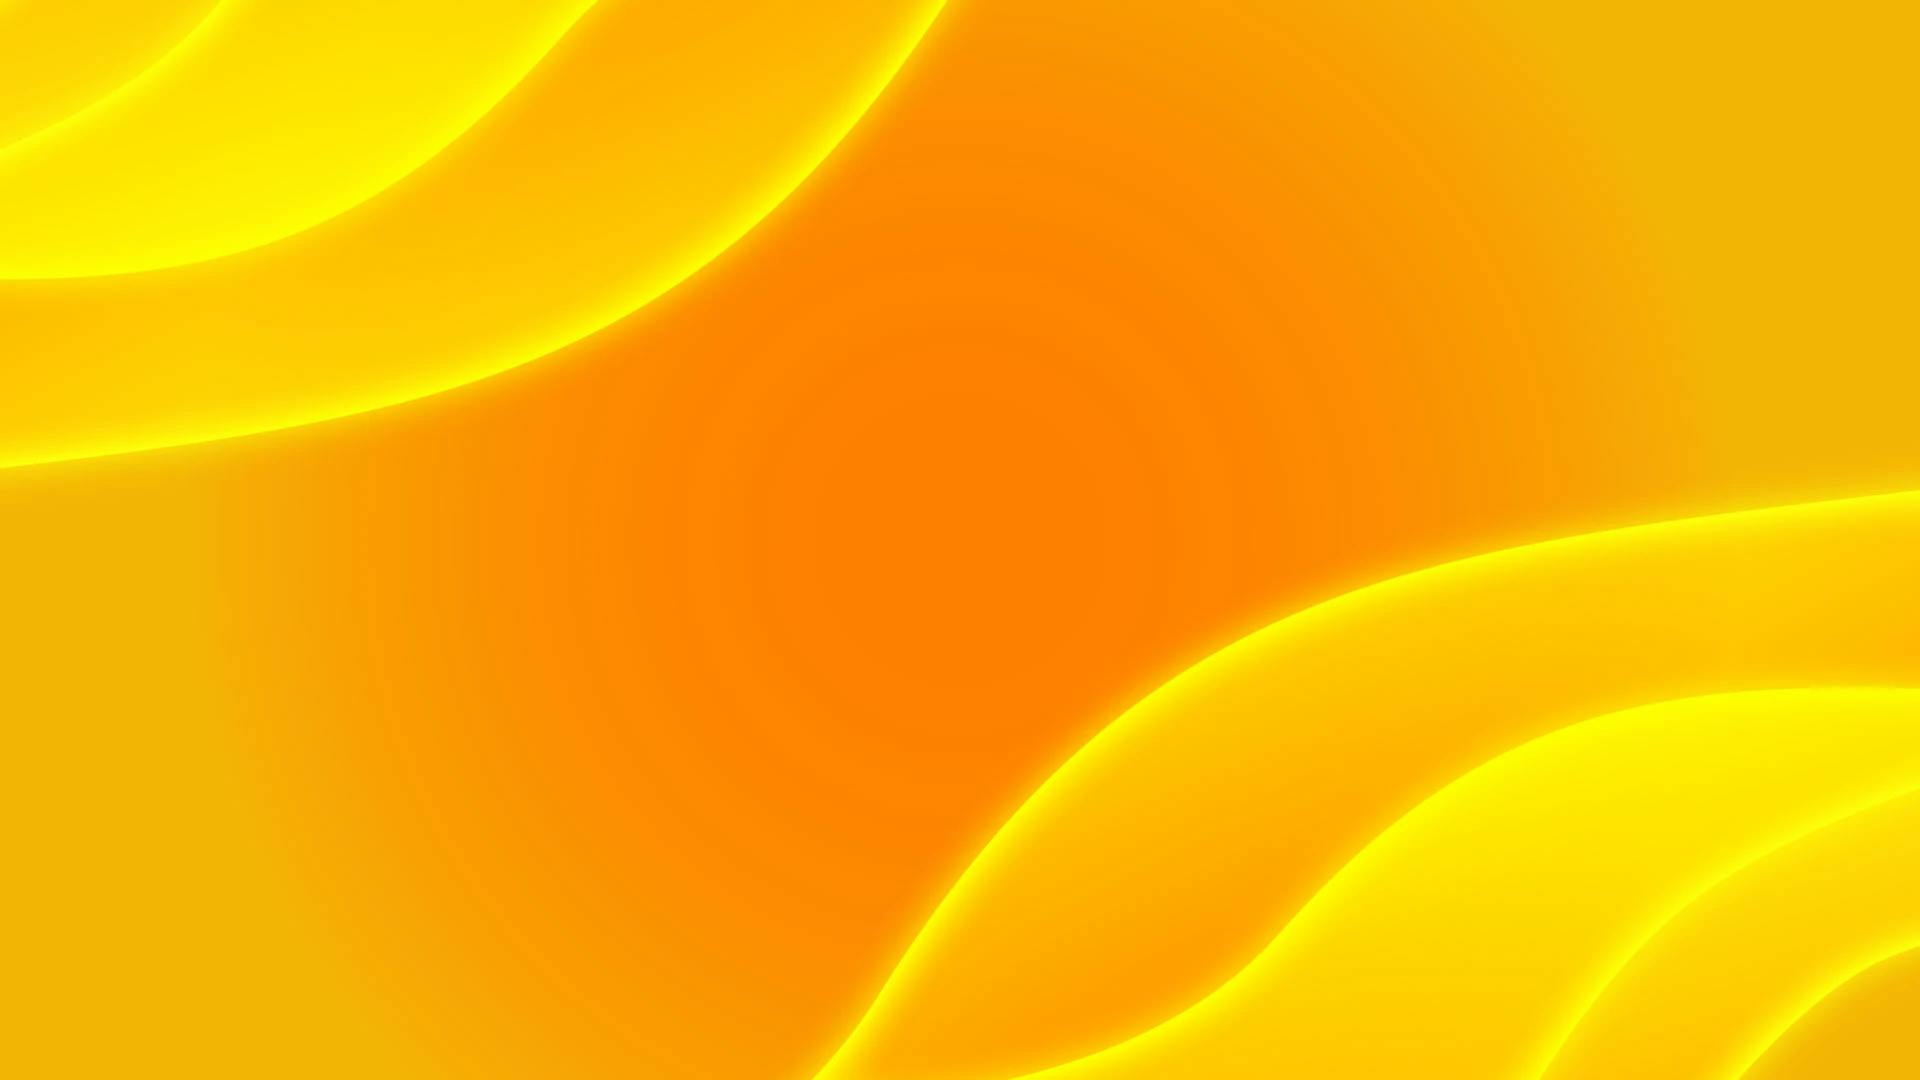 Radiant Energy Dynamic Gradient Abstract Background Template